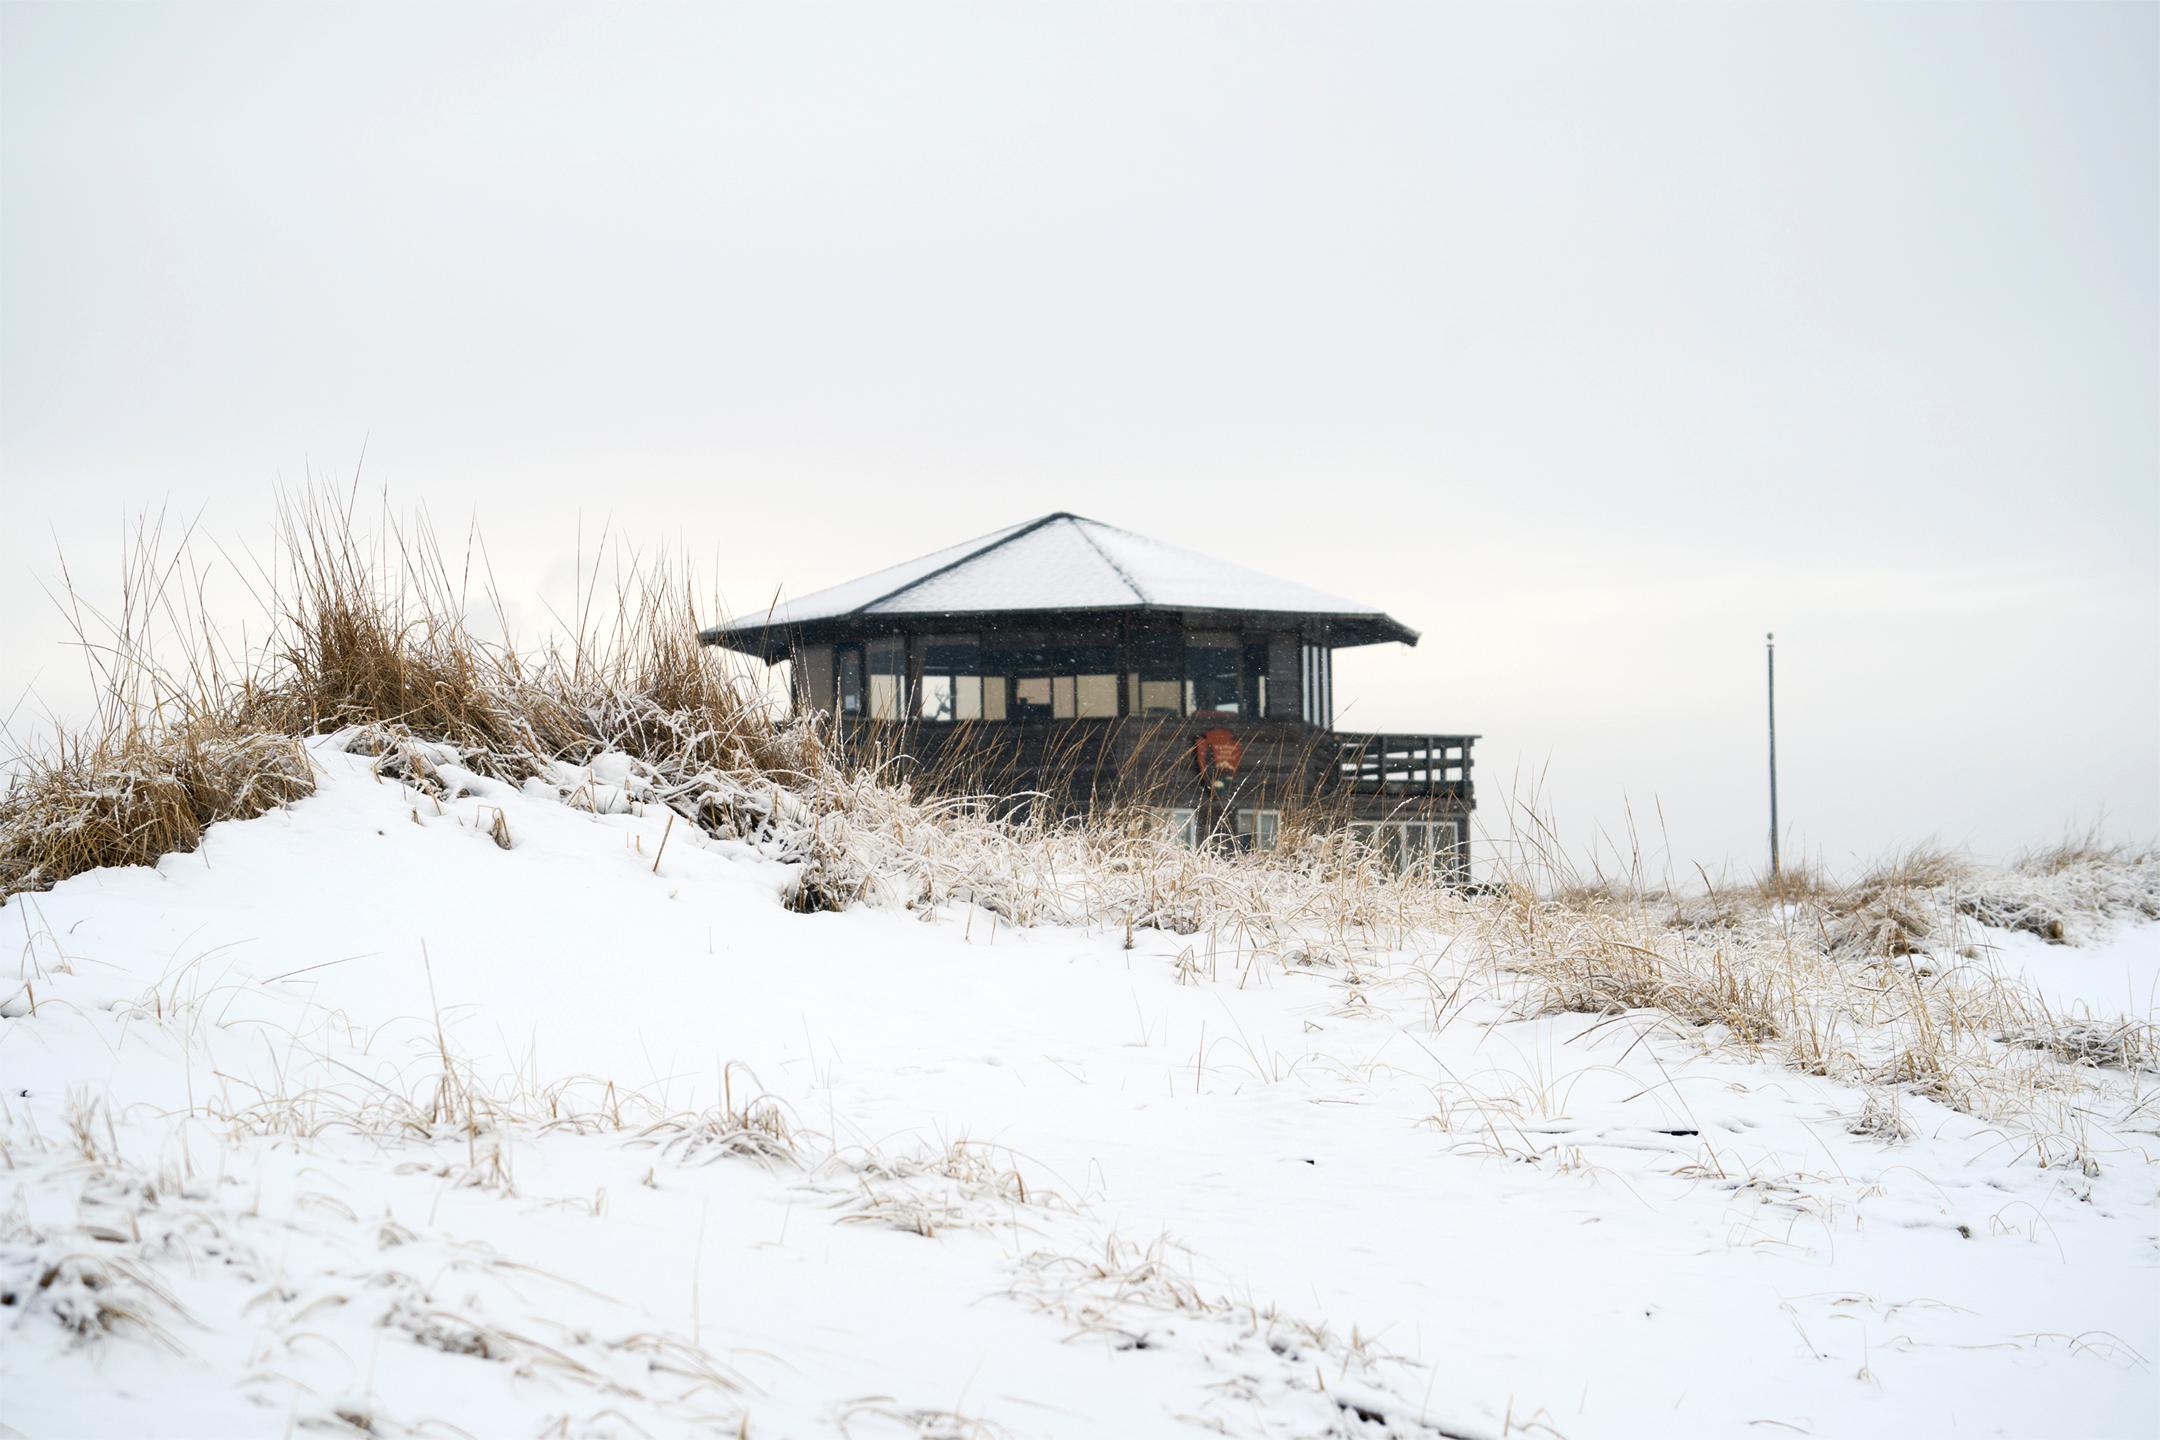 A brown hexagonal building covered in snow stands behind a beachside dune.